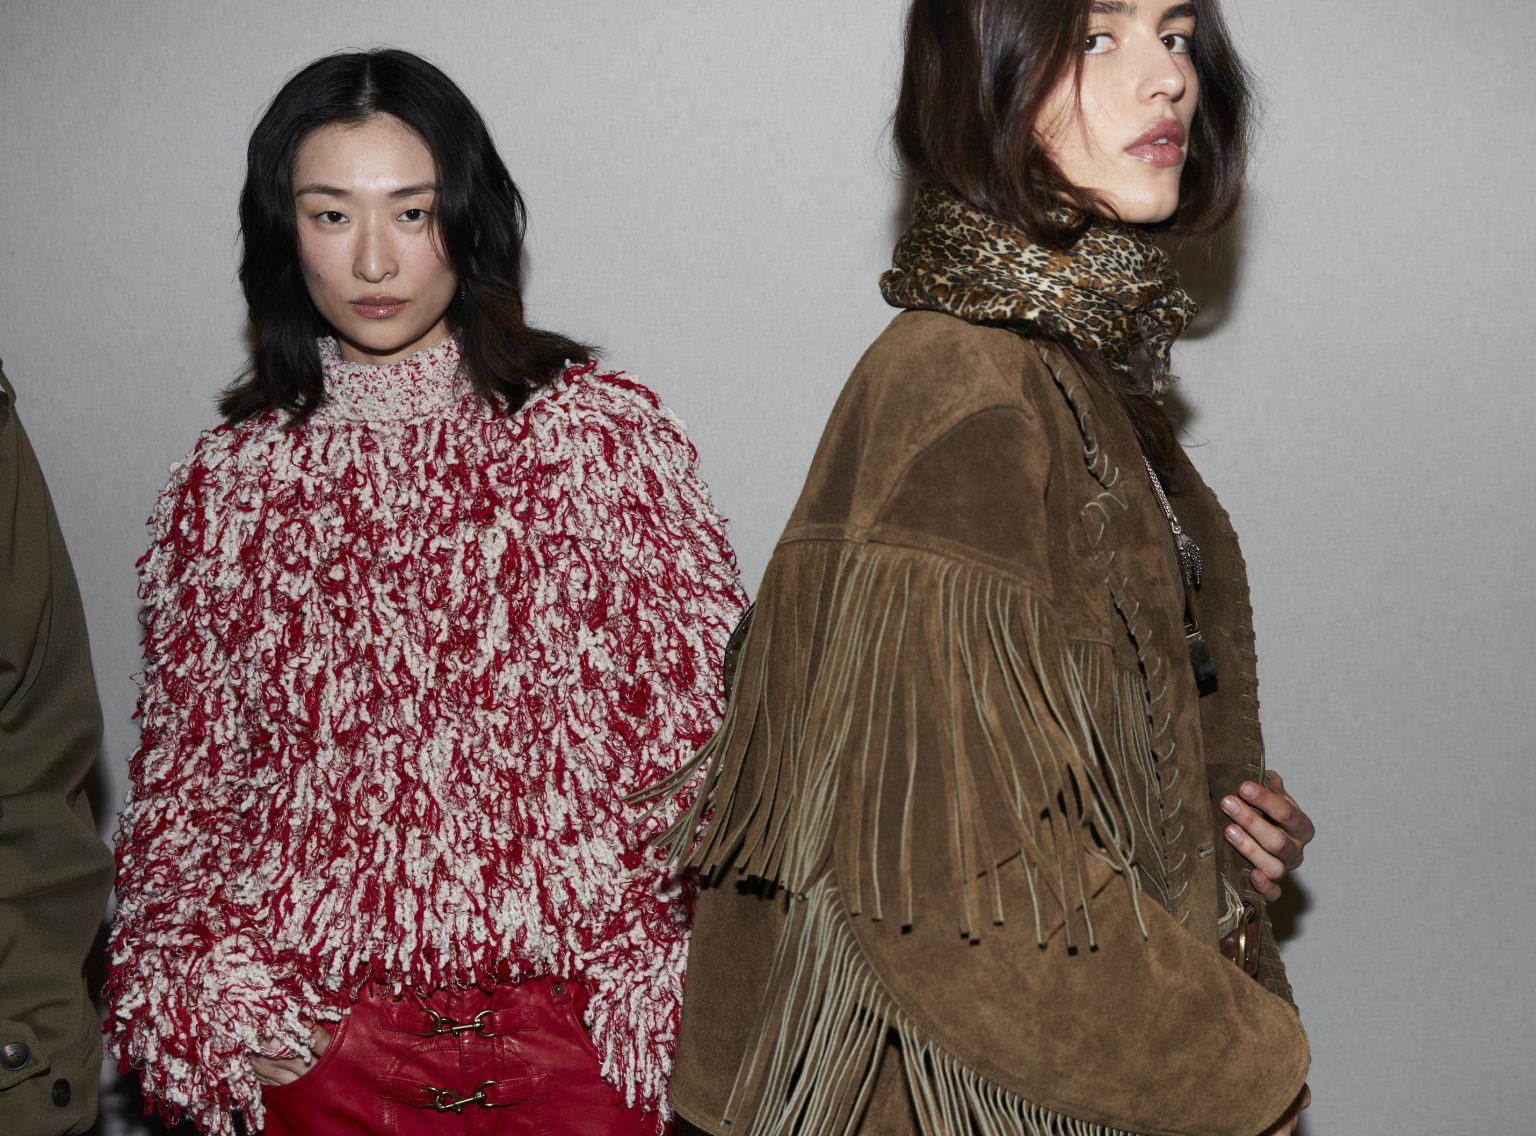 Two female models, one wearing a brown suede fringed jacket and leopard-printed scarf, the other in a shaggy red and white oversized sweater.